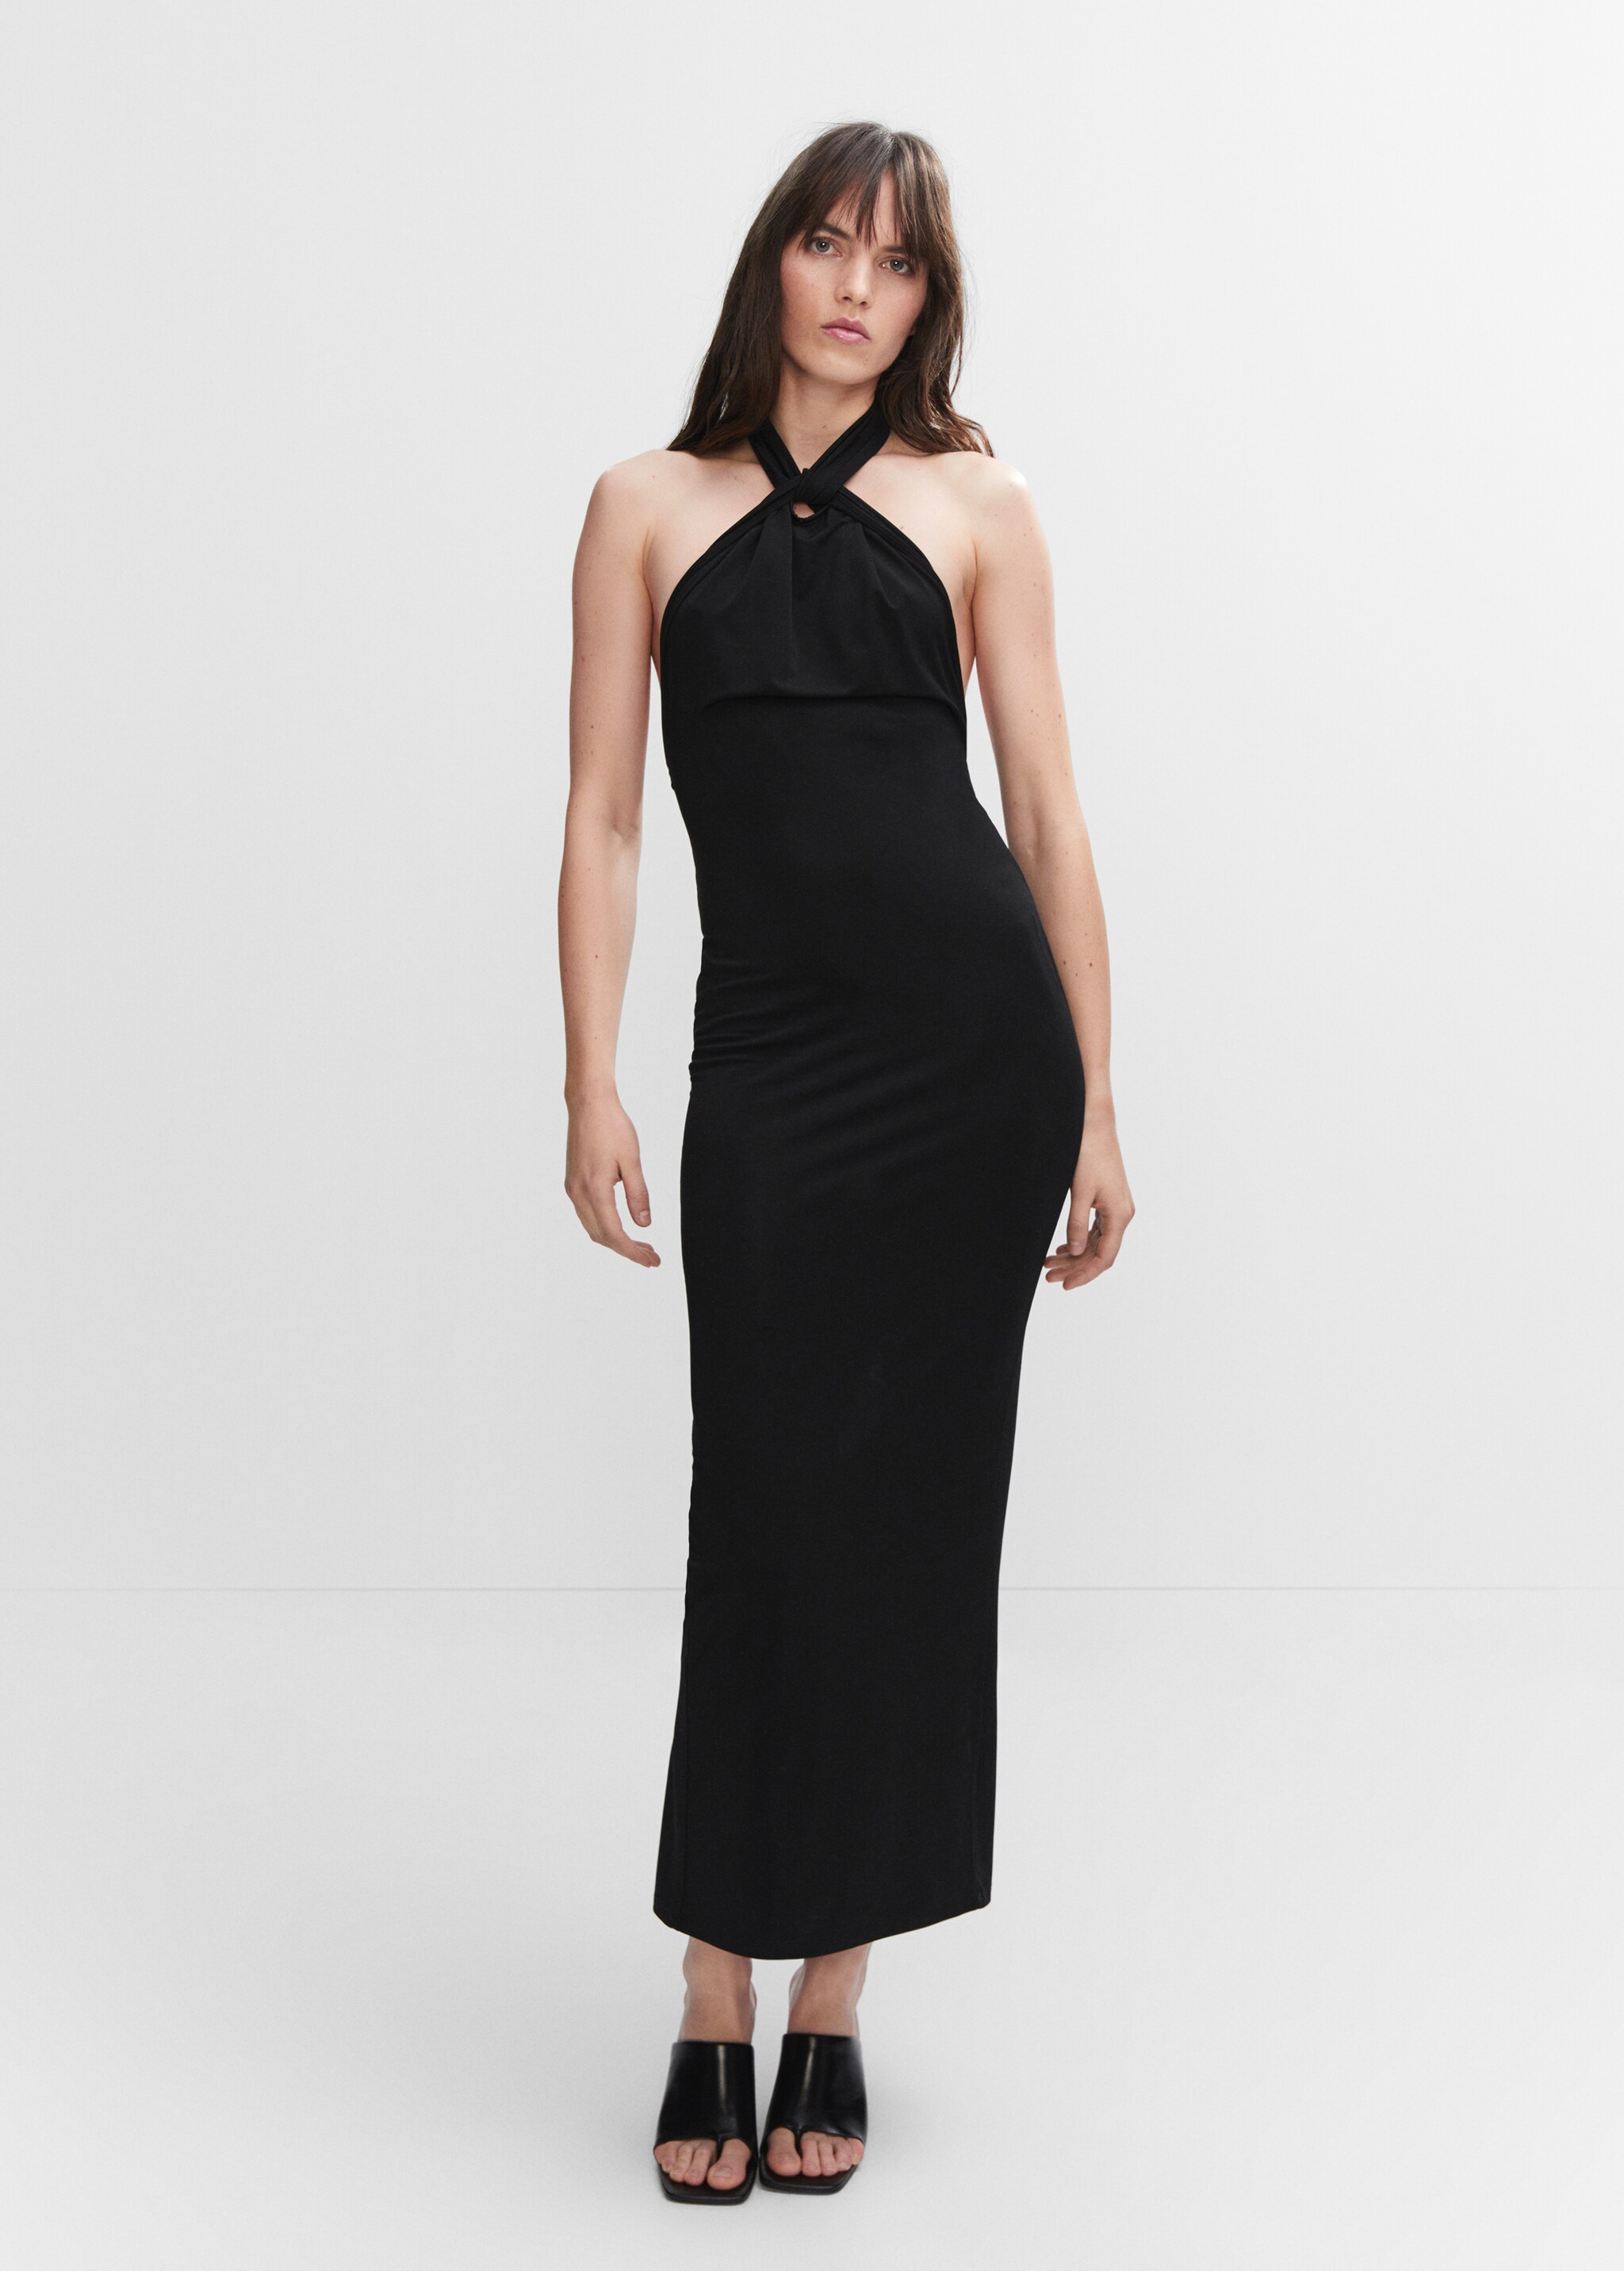 Halter dress with back opening - General plane